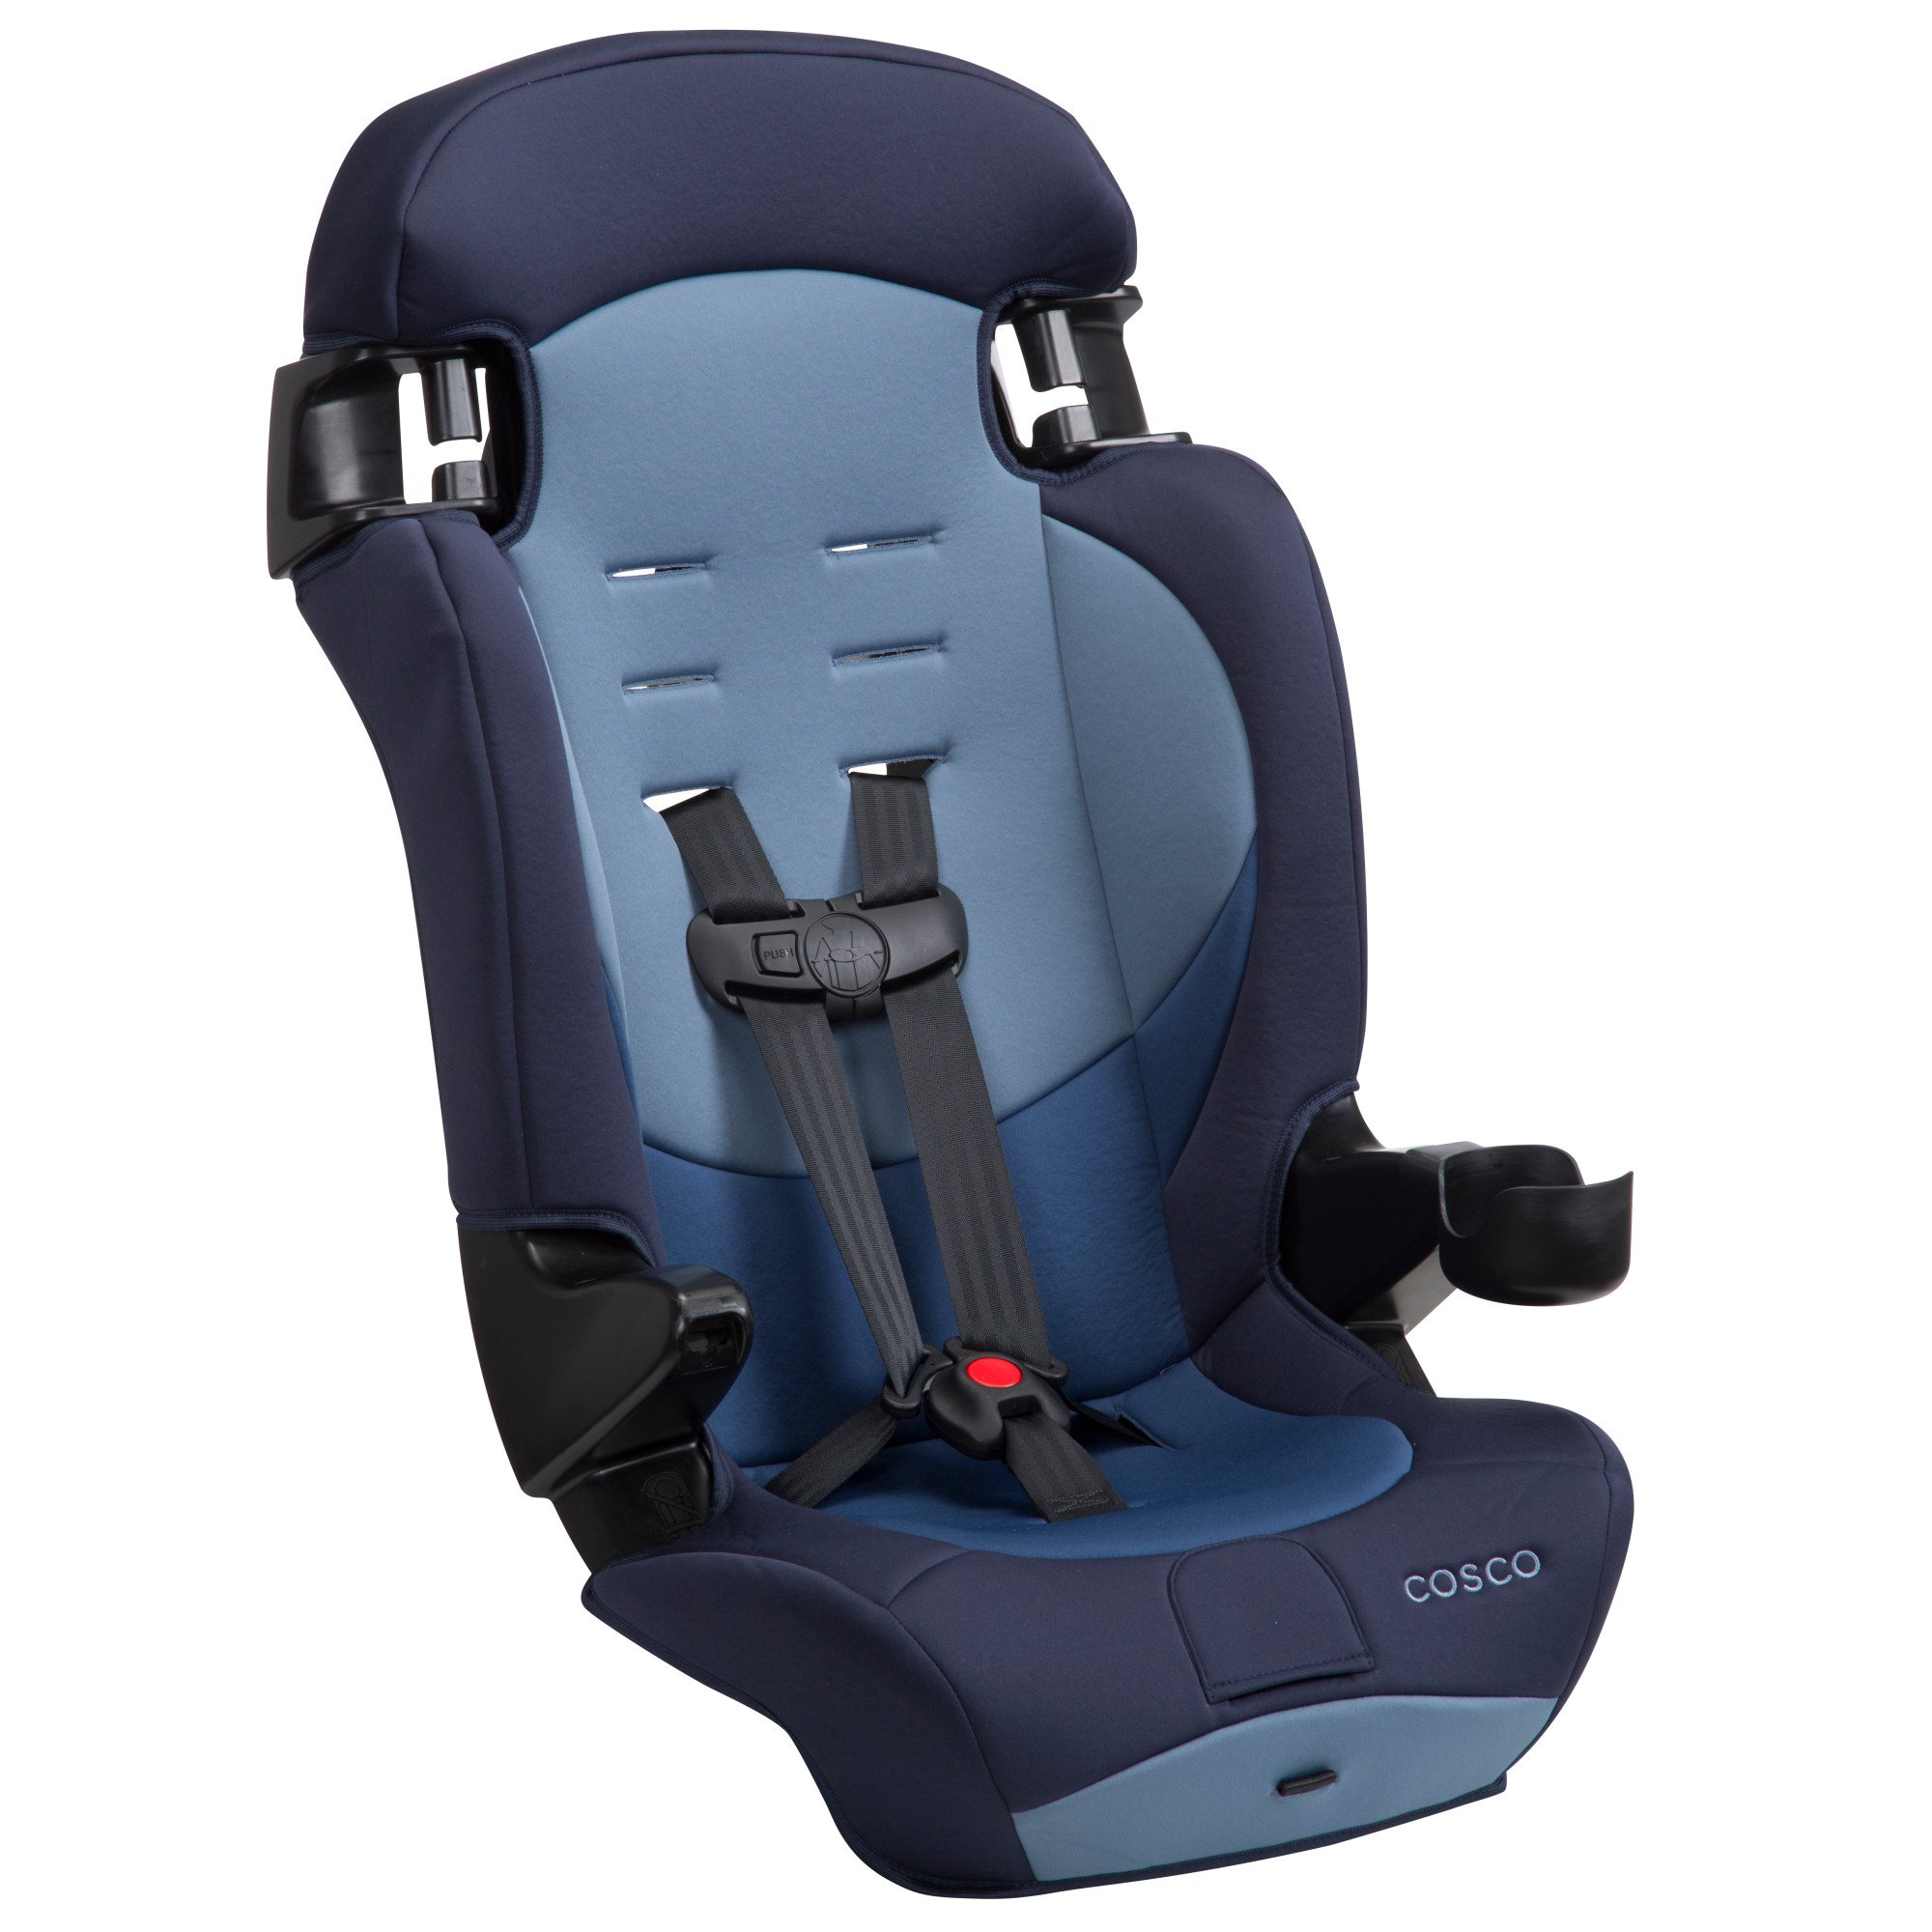 Cosco Finale Dx 2-in-1 Combination Booster Car Seat, Sport Blue, 1 Count (Pack of 1) & Onlook 2-in-1 Convertible Car Seat, Rear-Facing 5-40 pounds